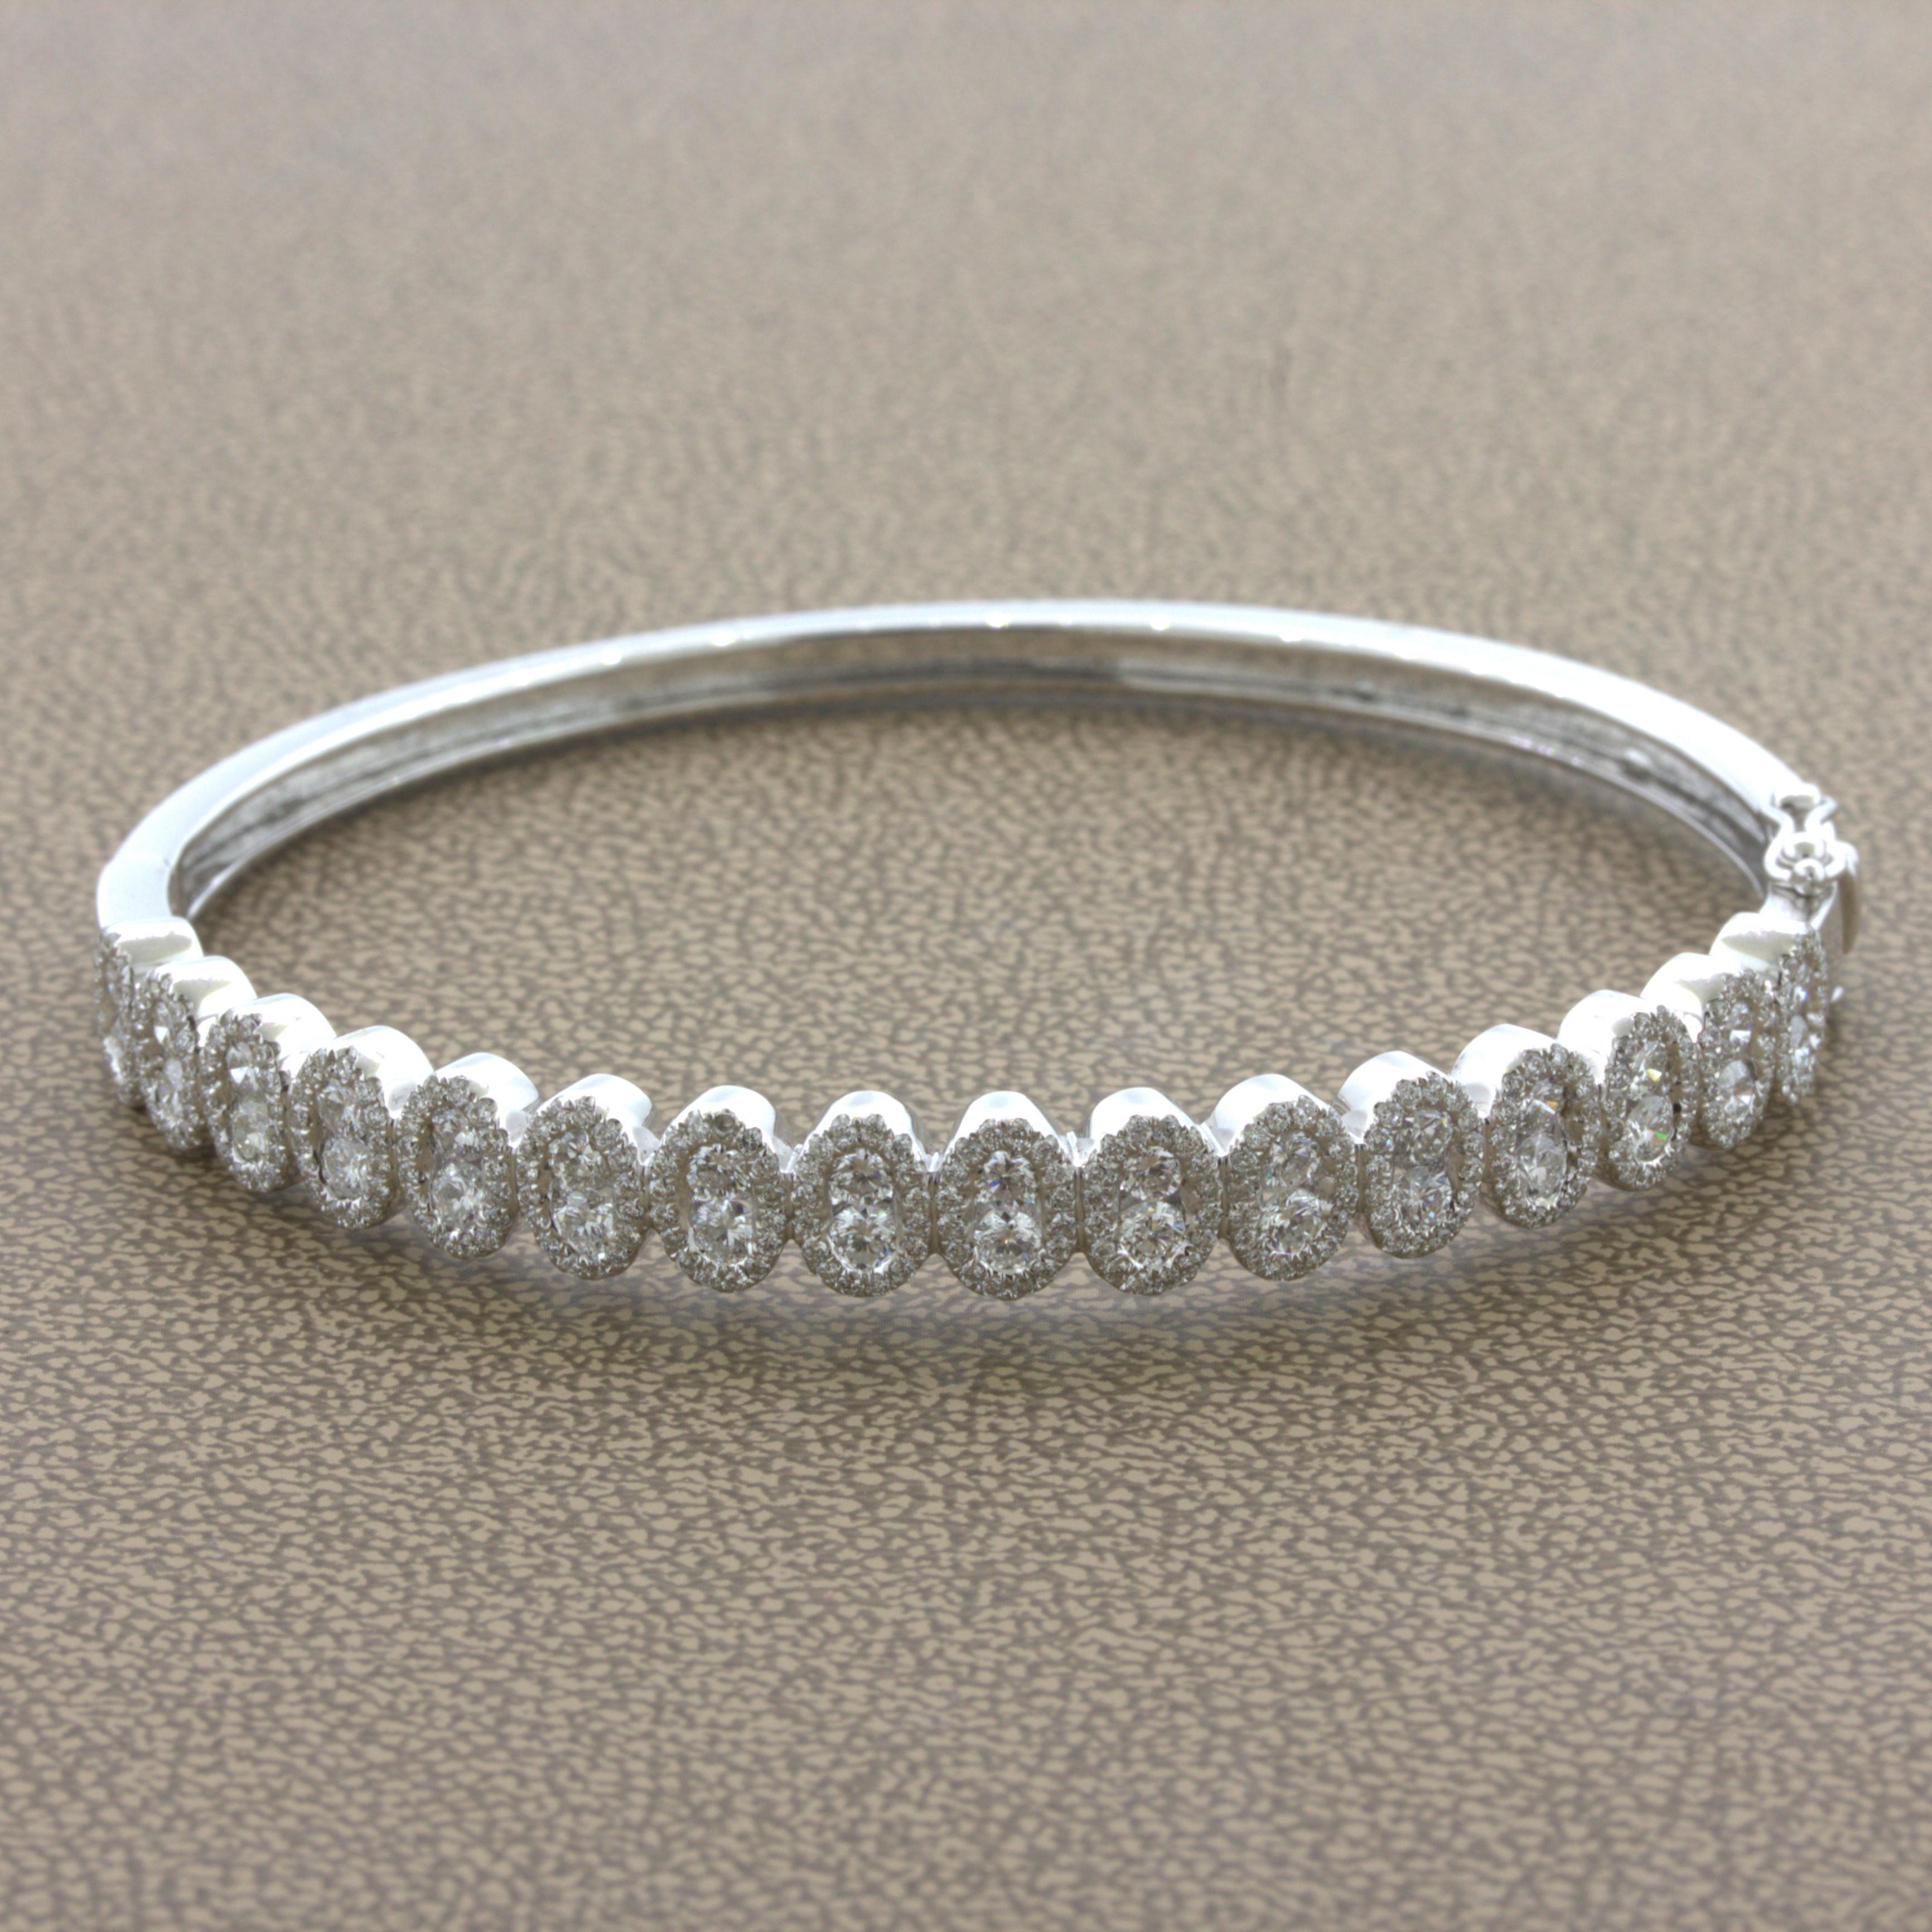 A modern and stylish bangle bracelet featuring 1.36 carats of bright white VS quality diamonds. They are set in vertical pairs with halos of smaller round brilliant-cut diamonds set around them. Made in 18k white gold and ready to be worn.

Outer